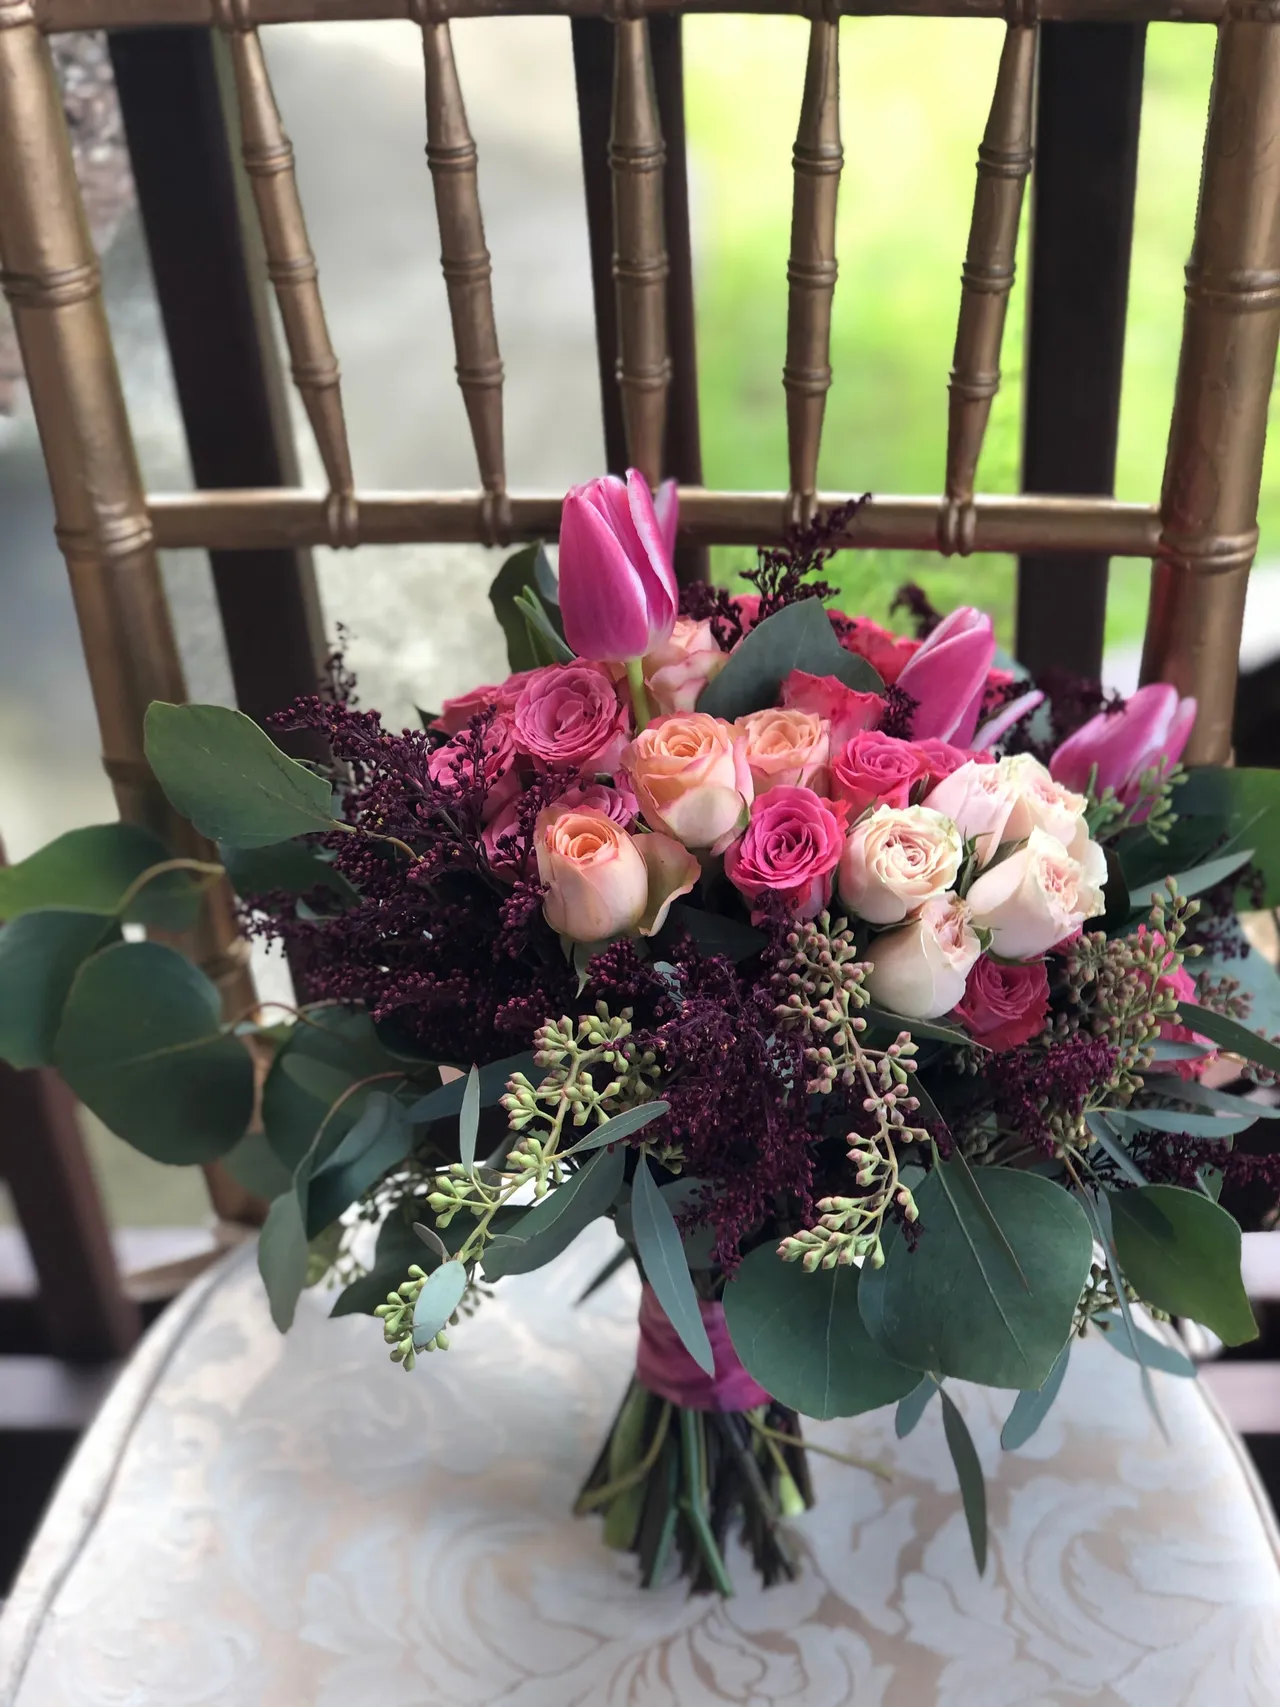 A delicate medley of pink roses and vibrant tulips, elegantly tied together in a symphony of color.